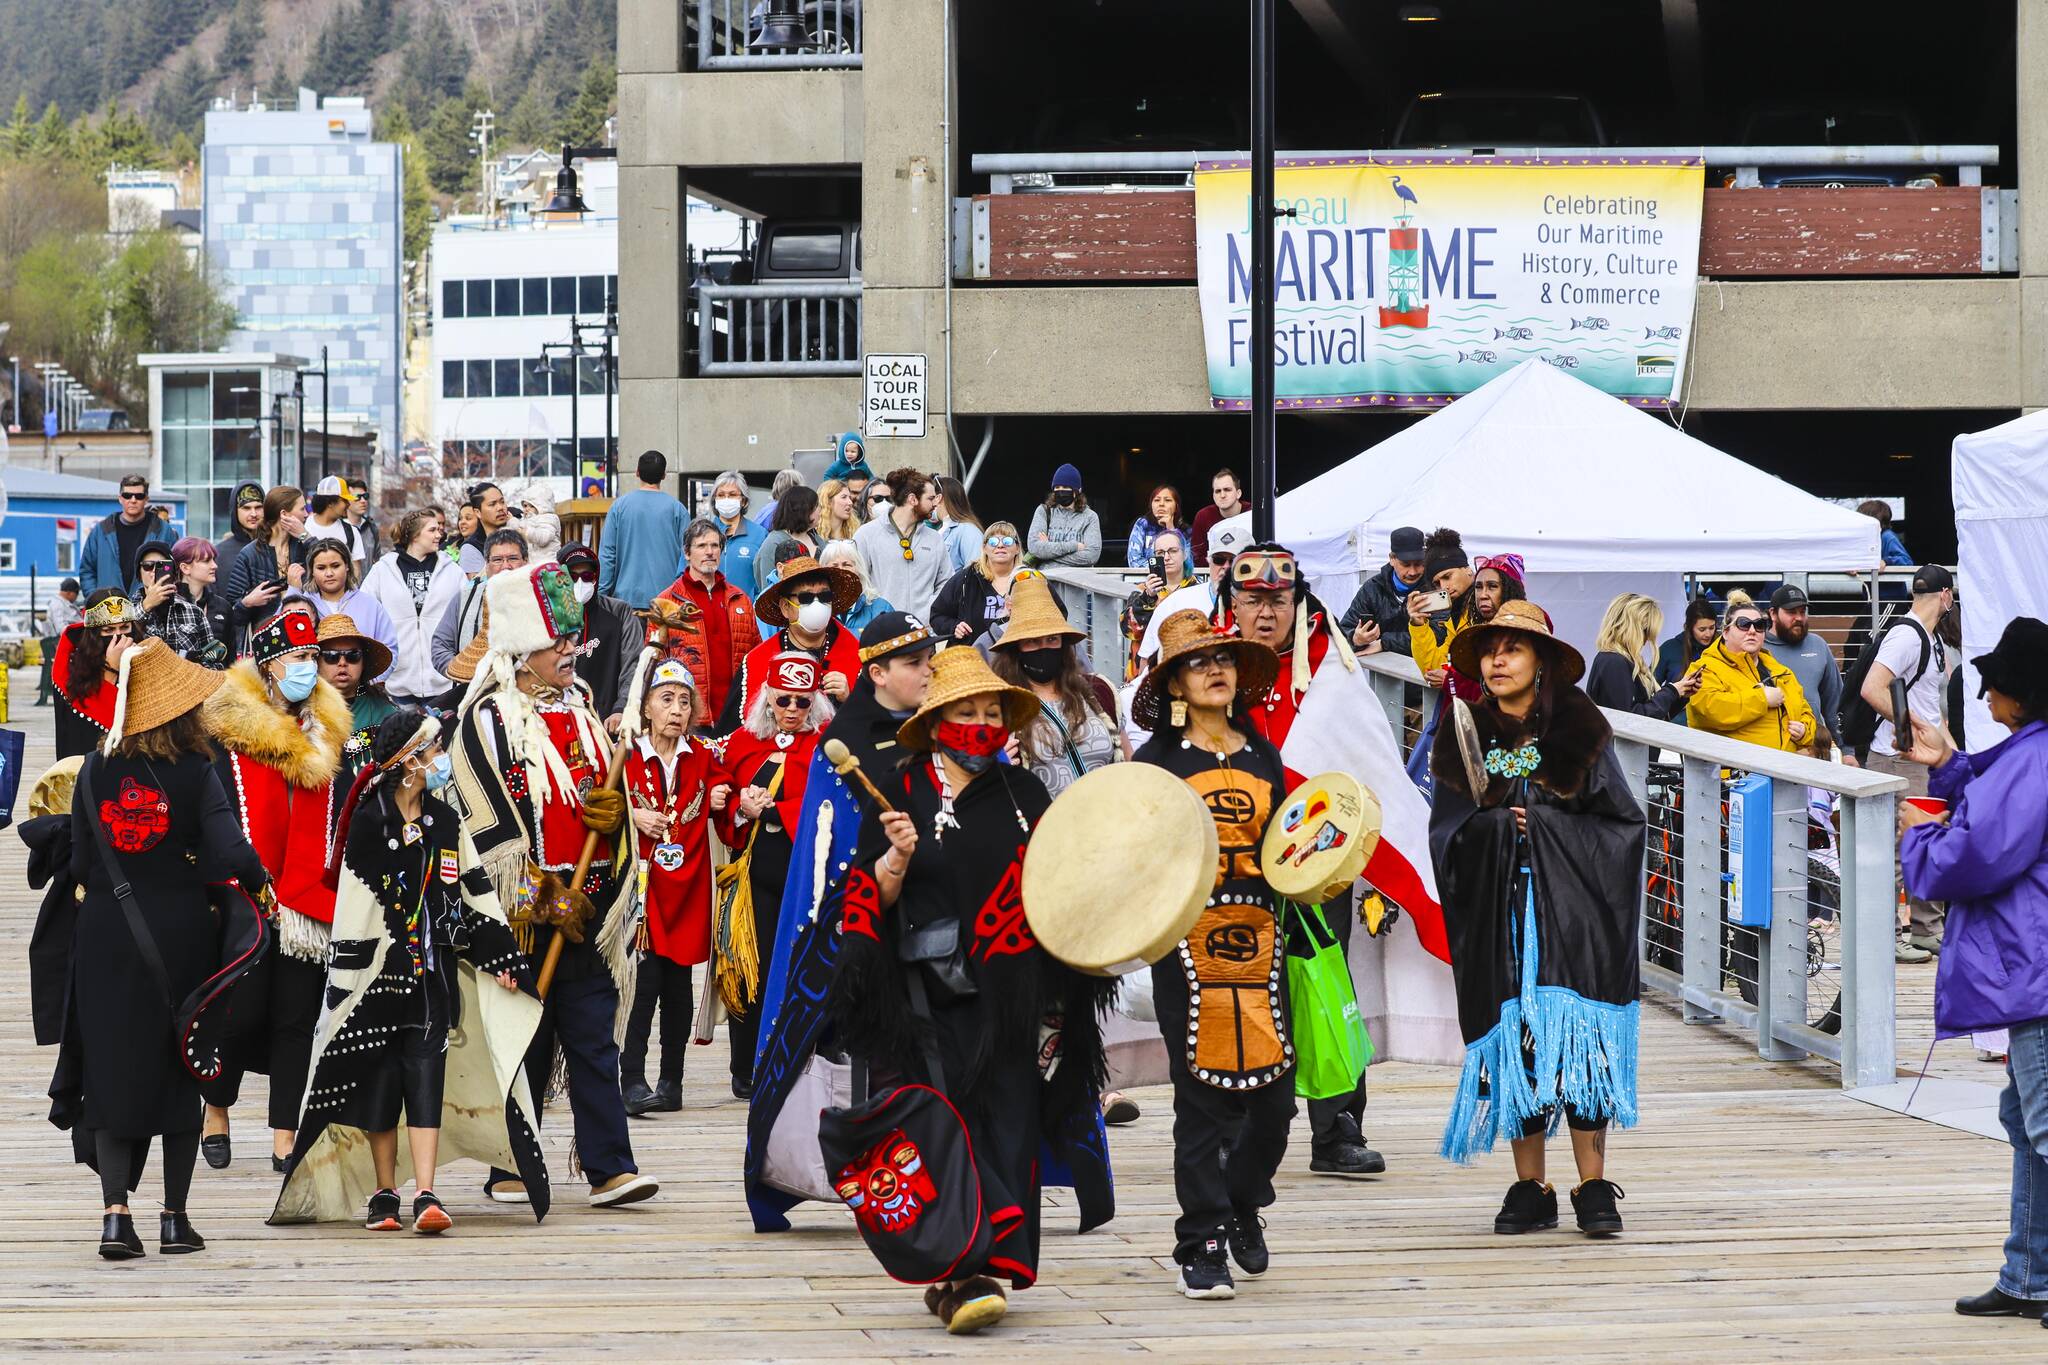 Members of the Yées Ḵu.oo multicultural dance group advance up the pier during the 12th Annual Maritime Festival on May 7, 2022. (Michael S. Lockett / Juneau Empire)